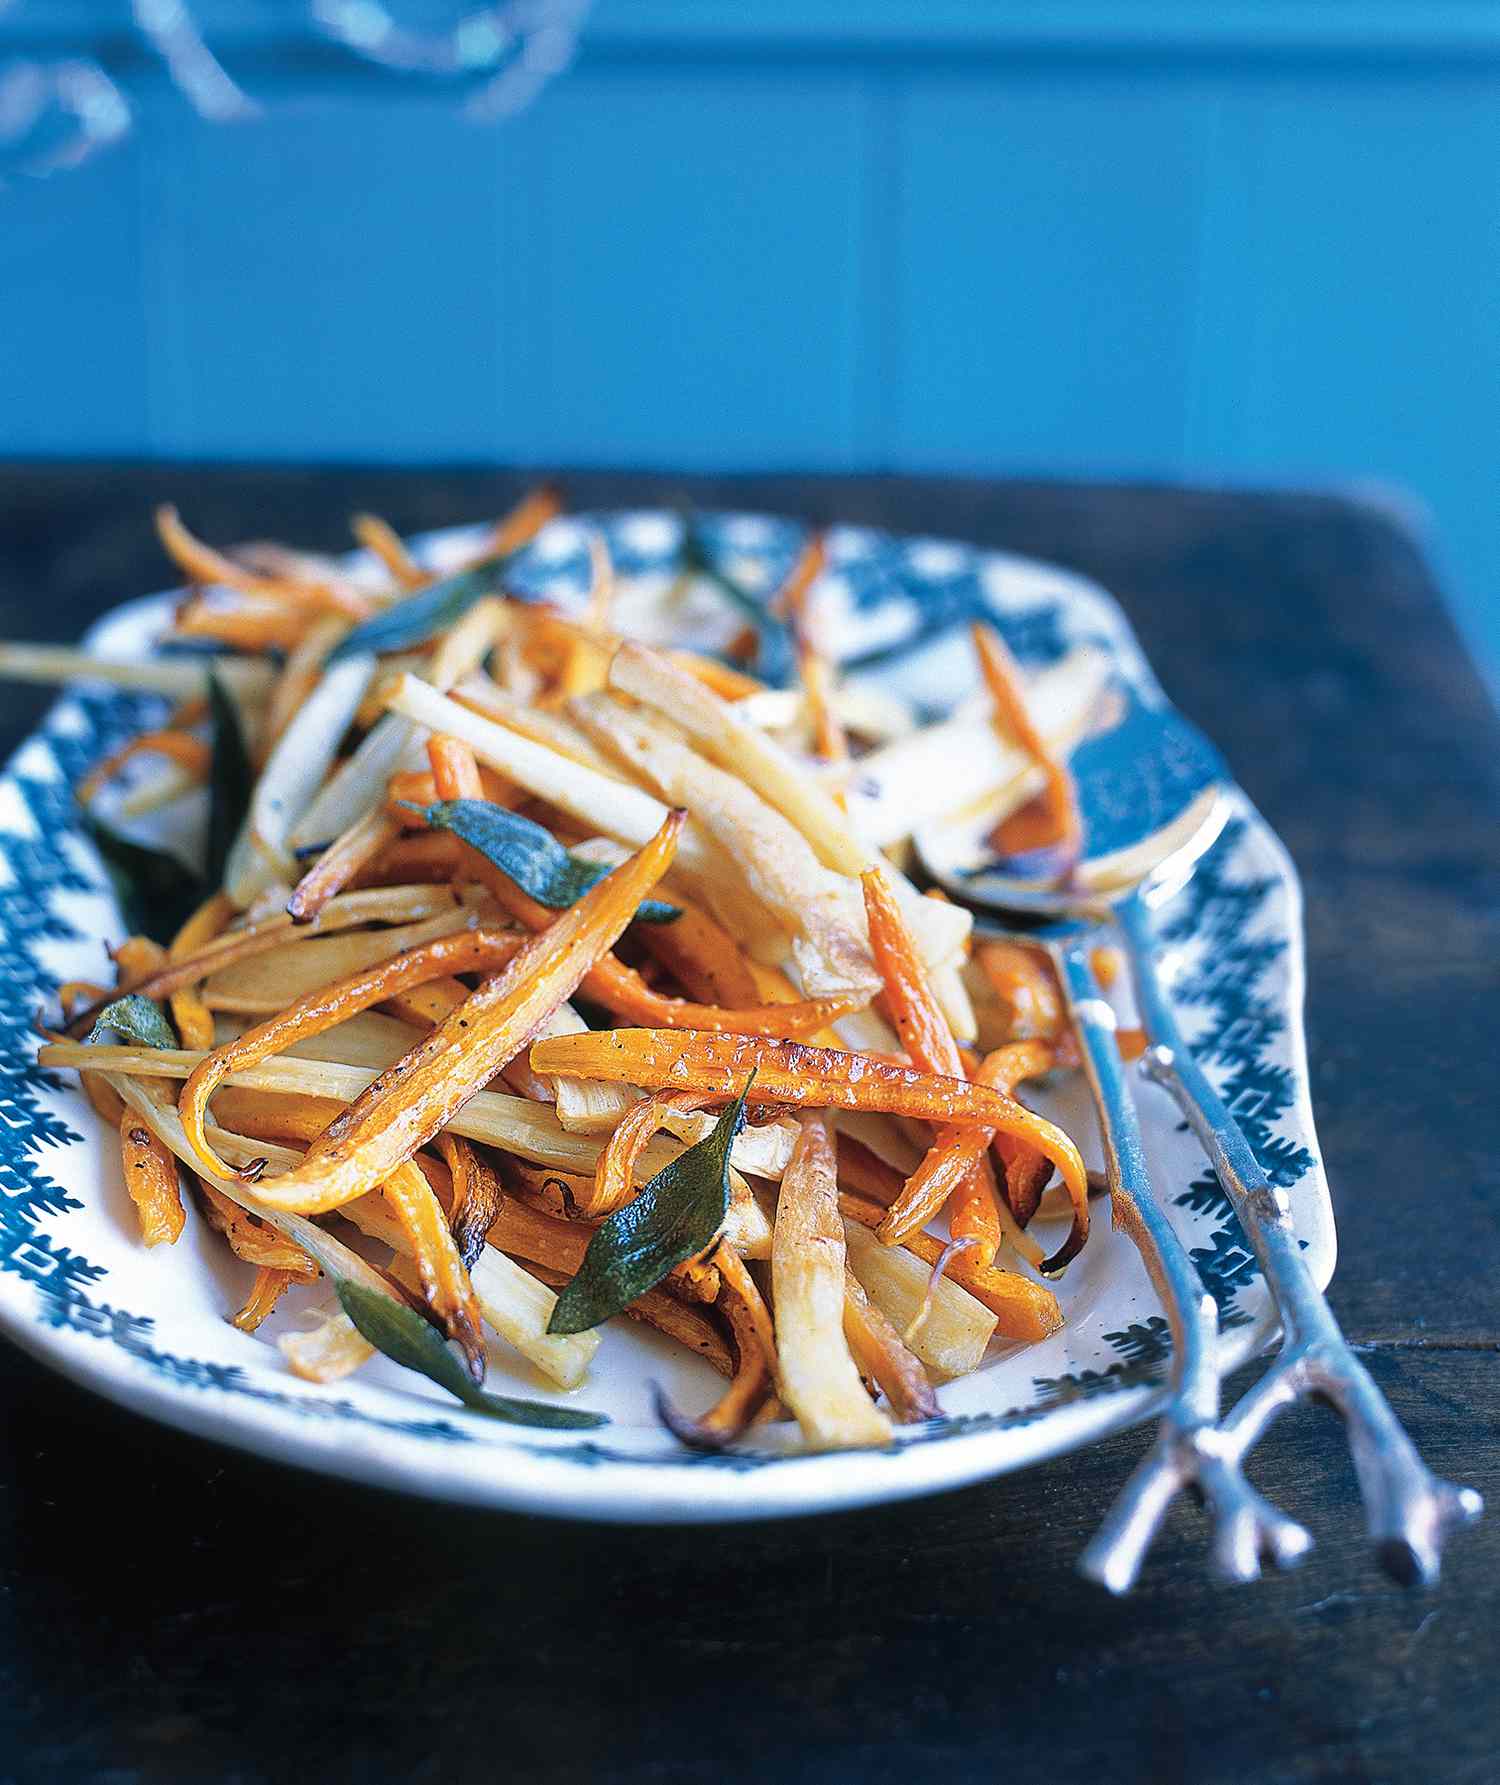 Roasted Parsnips and Carrots With Sage